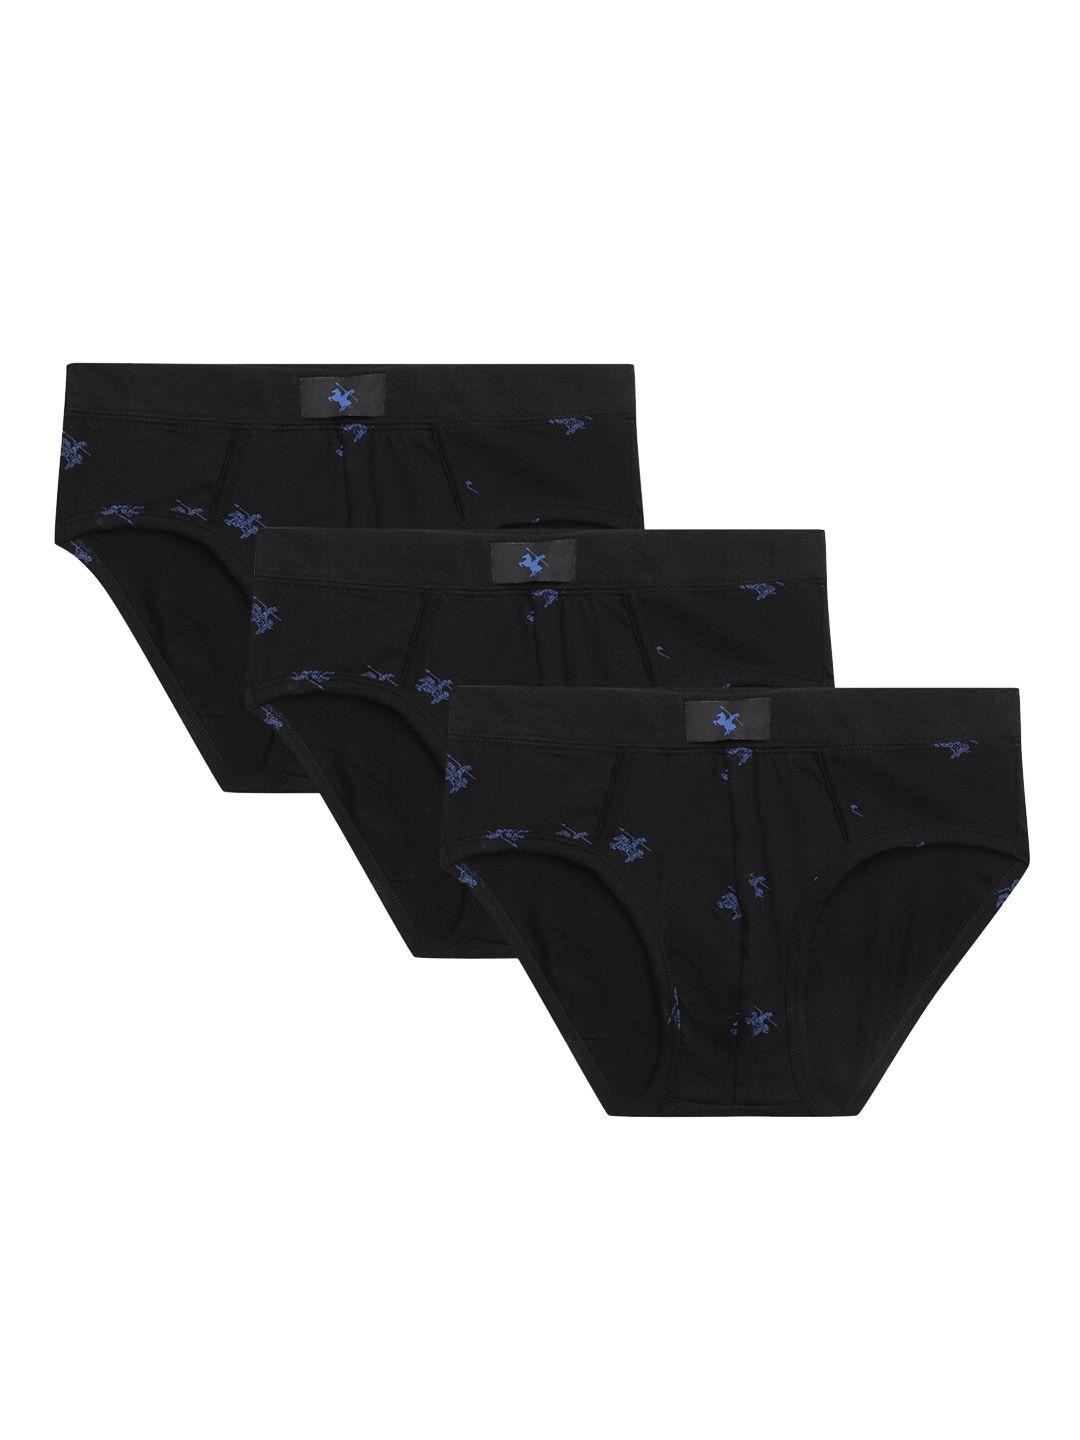 Cantabil Men Assorted Pack of 3 Printed Cotton Briefs MBRF00004A-BLACK_P3